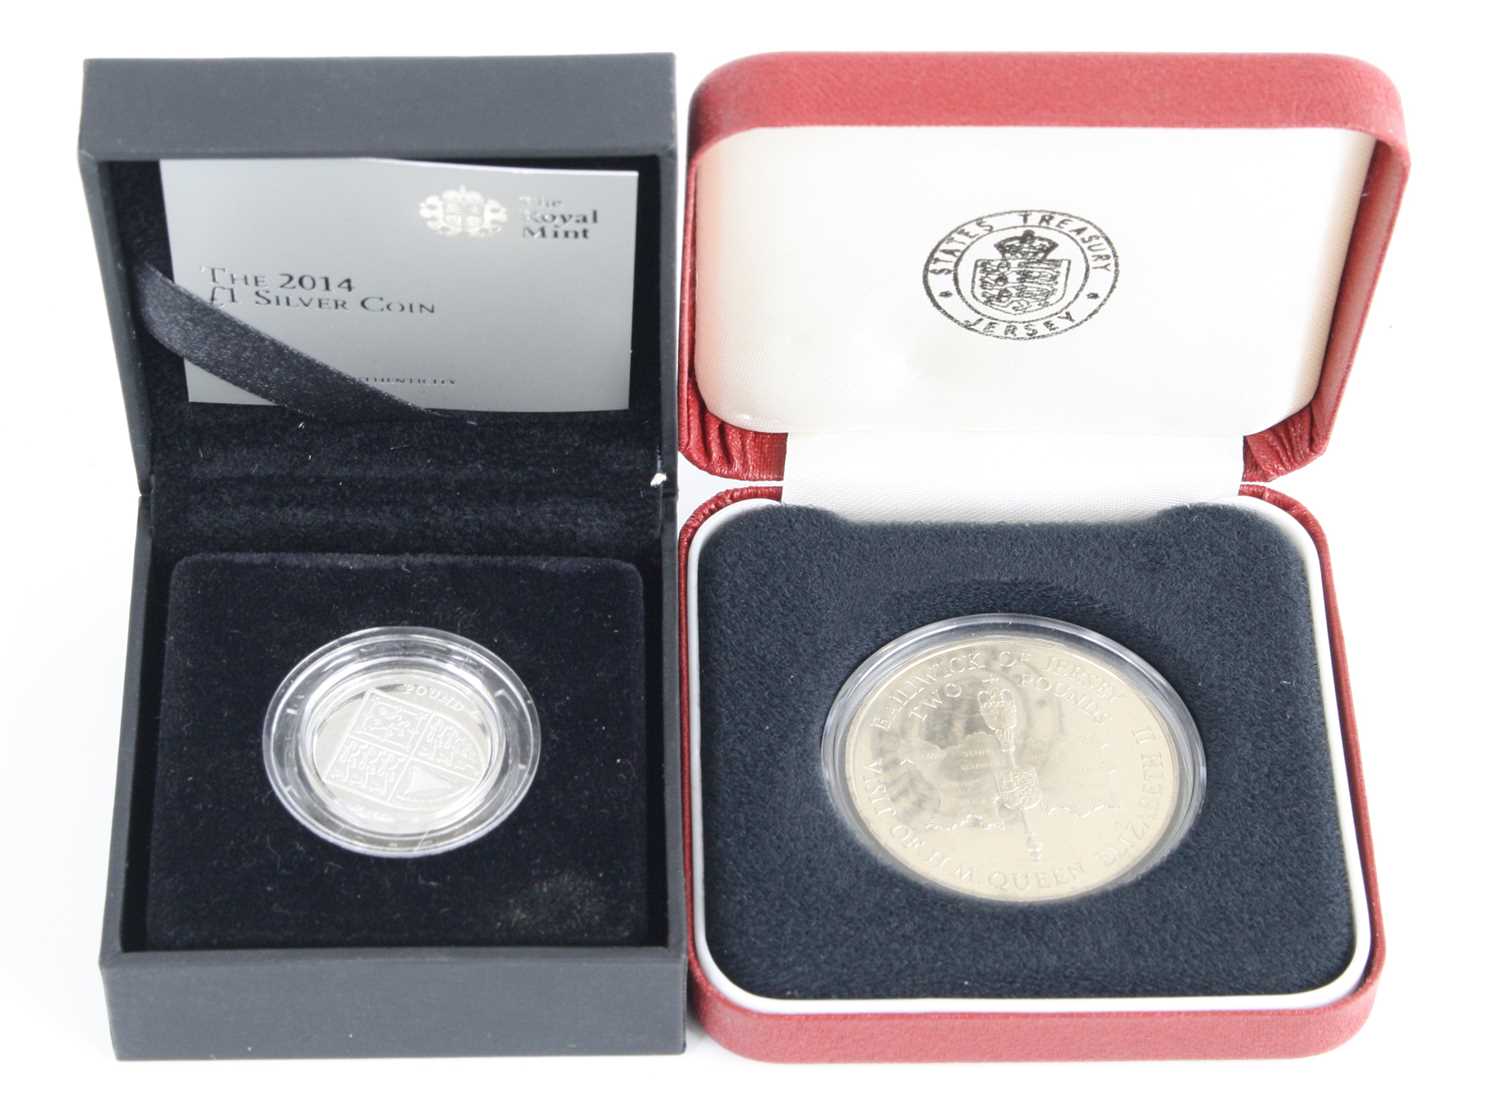 United Kingdom, The Royal Mint, 2014 £1 Silver Coin, boxed with certificate, together with a 1989